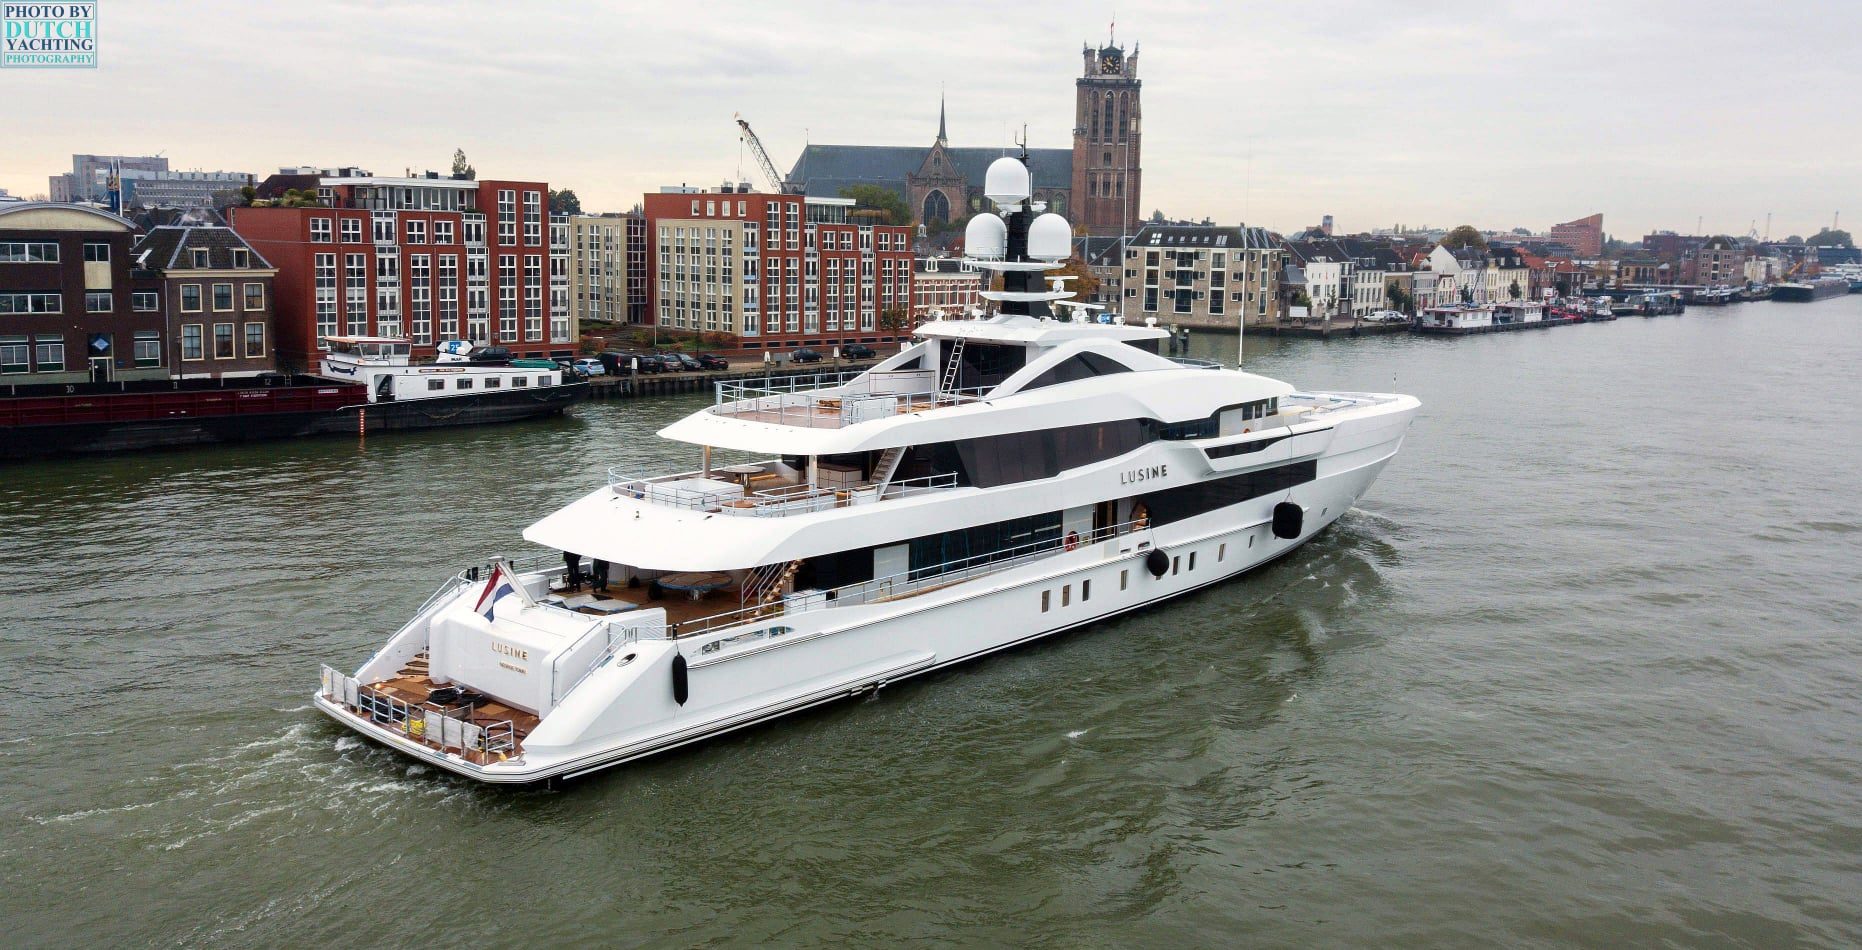 Lusine Yacht • Heesen • 2021 • For Sale - For Charter